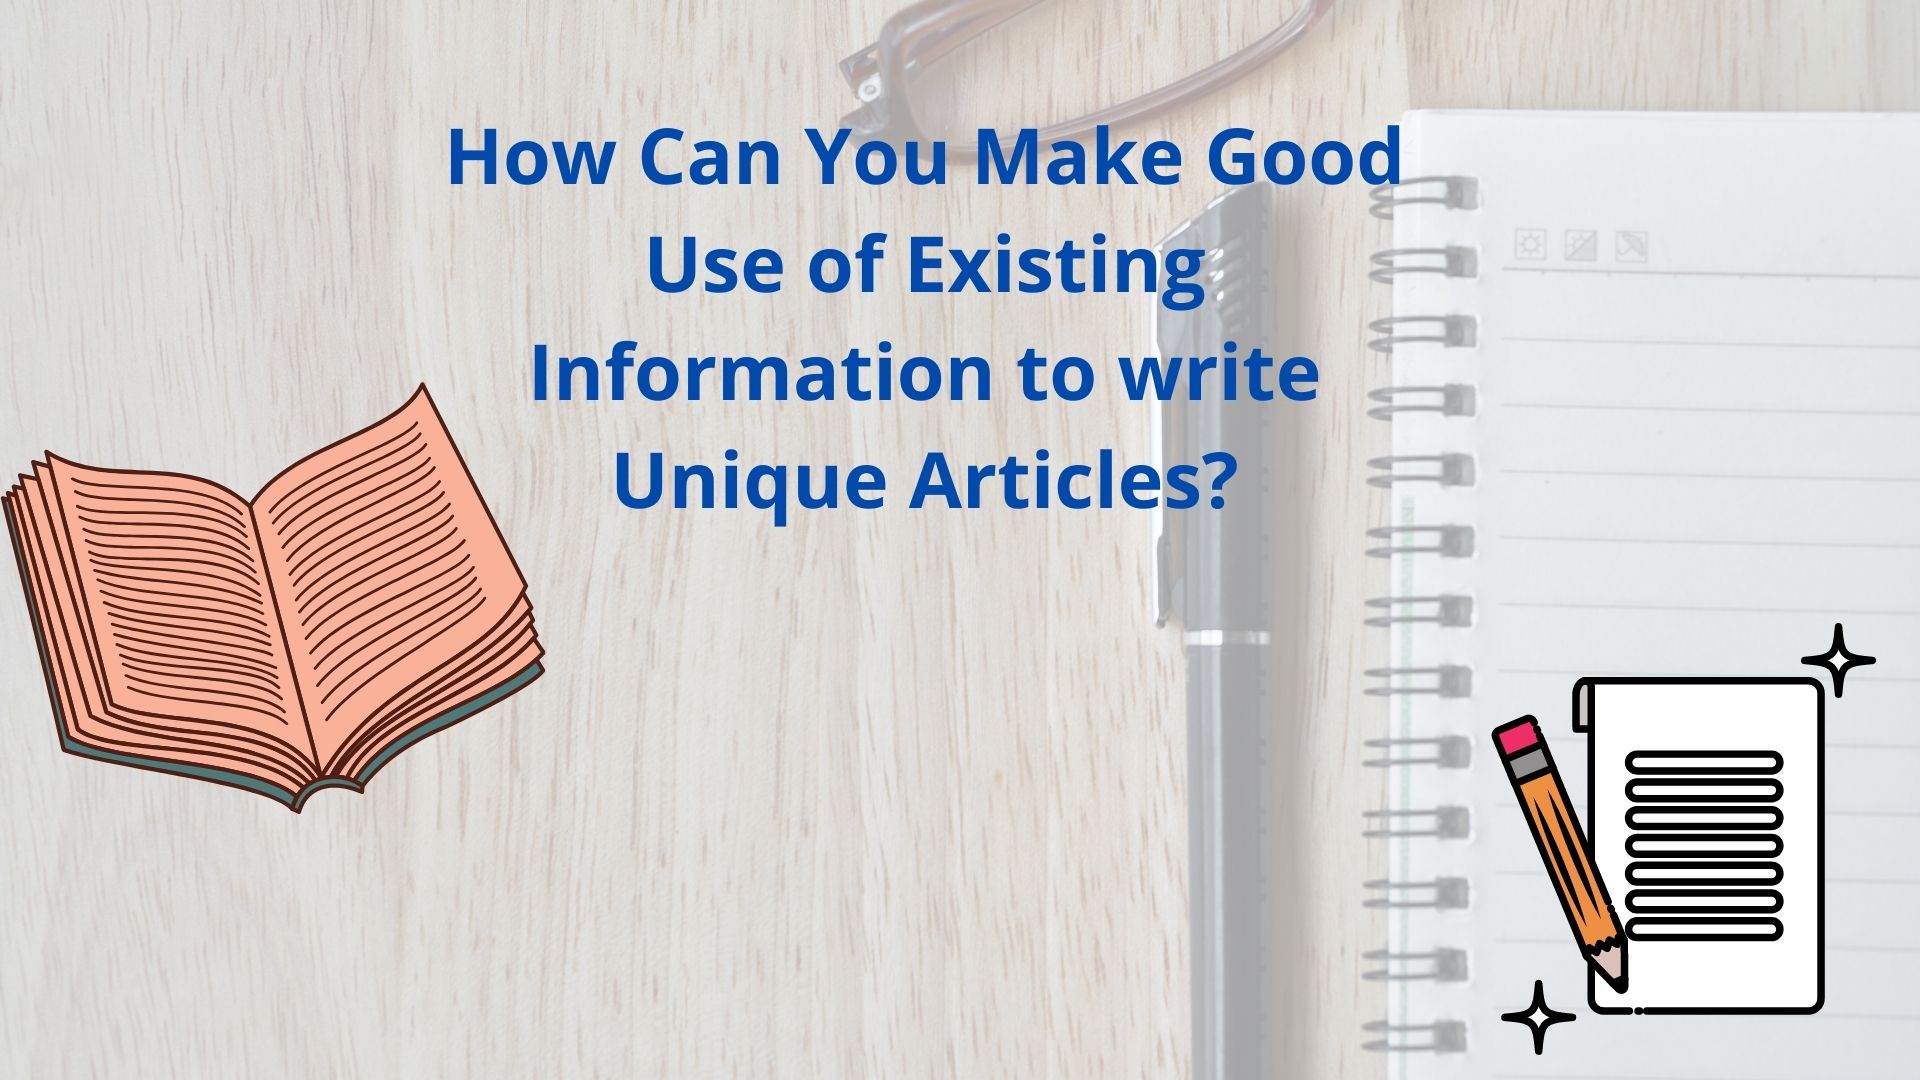 How Can You Make Good Use of Existing Information to write Unique Articles?